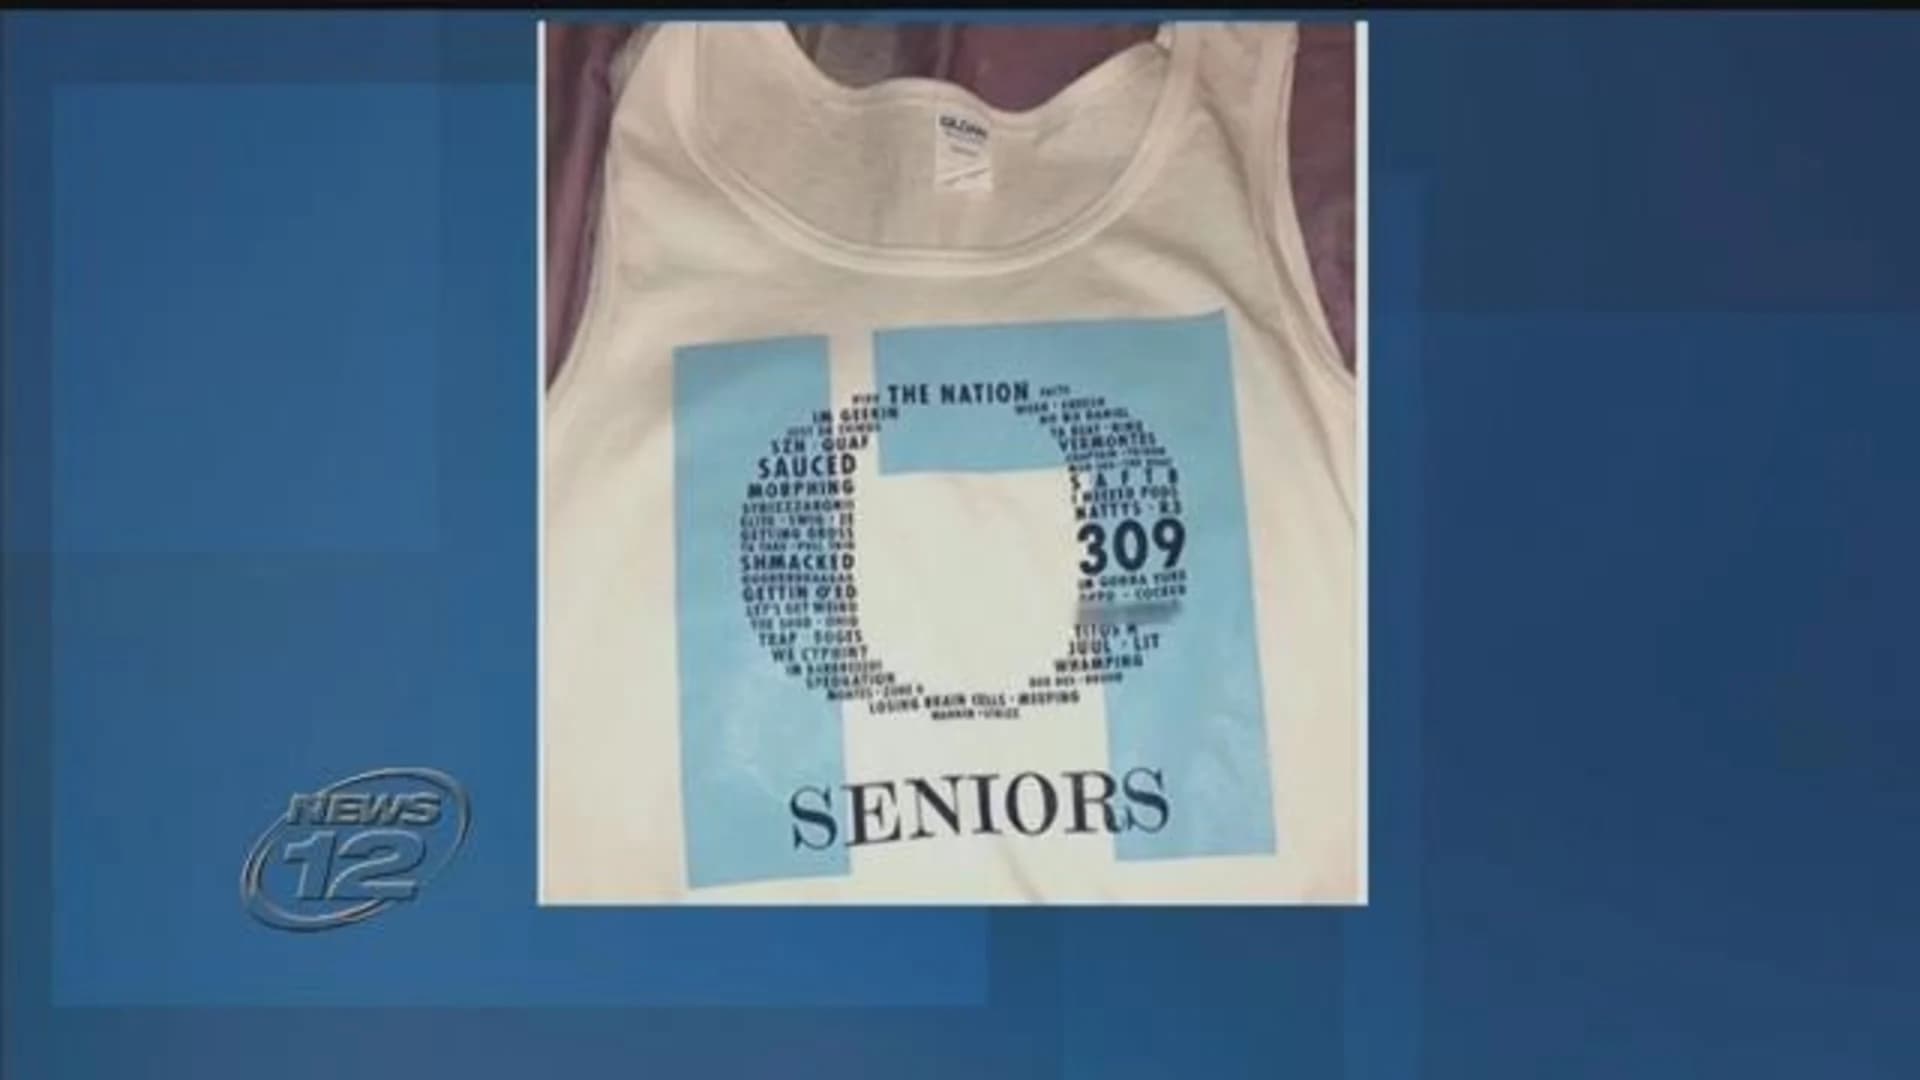 T-shirt created by Oceanside HS seniors draws criticism